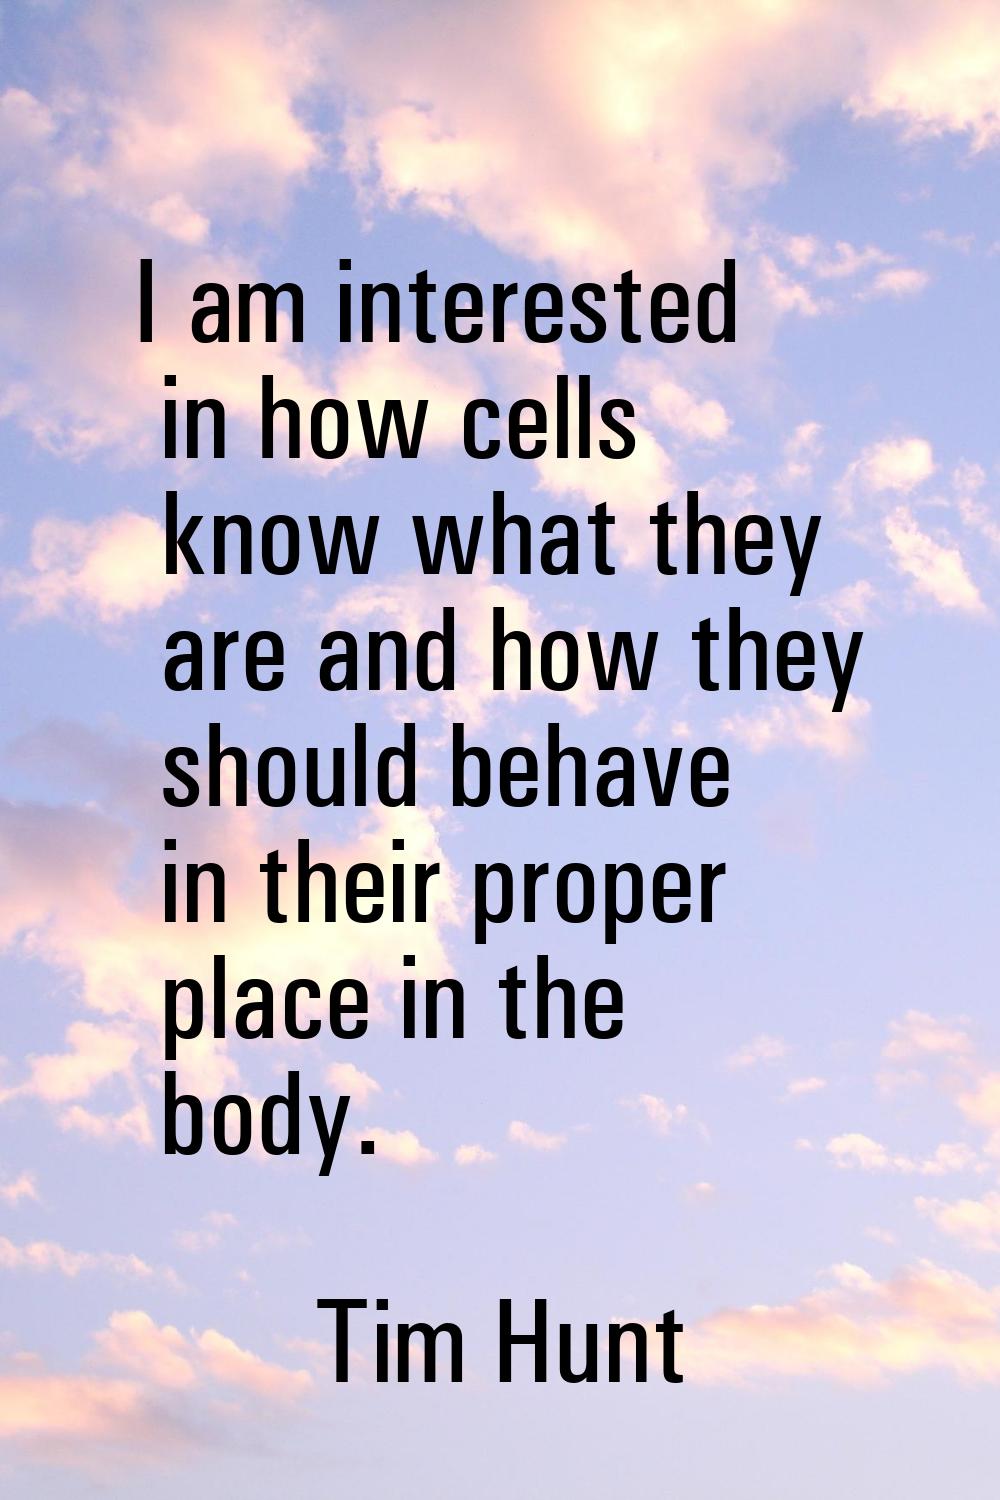 I am interested in how cells know what they are and how they should behave in their proper place in